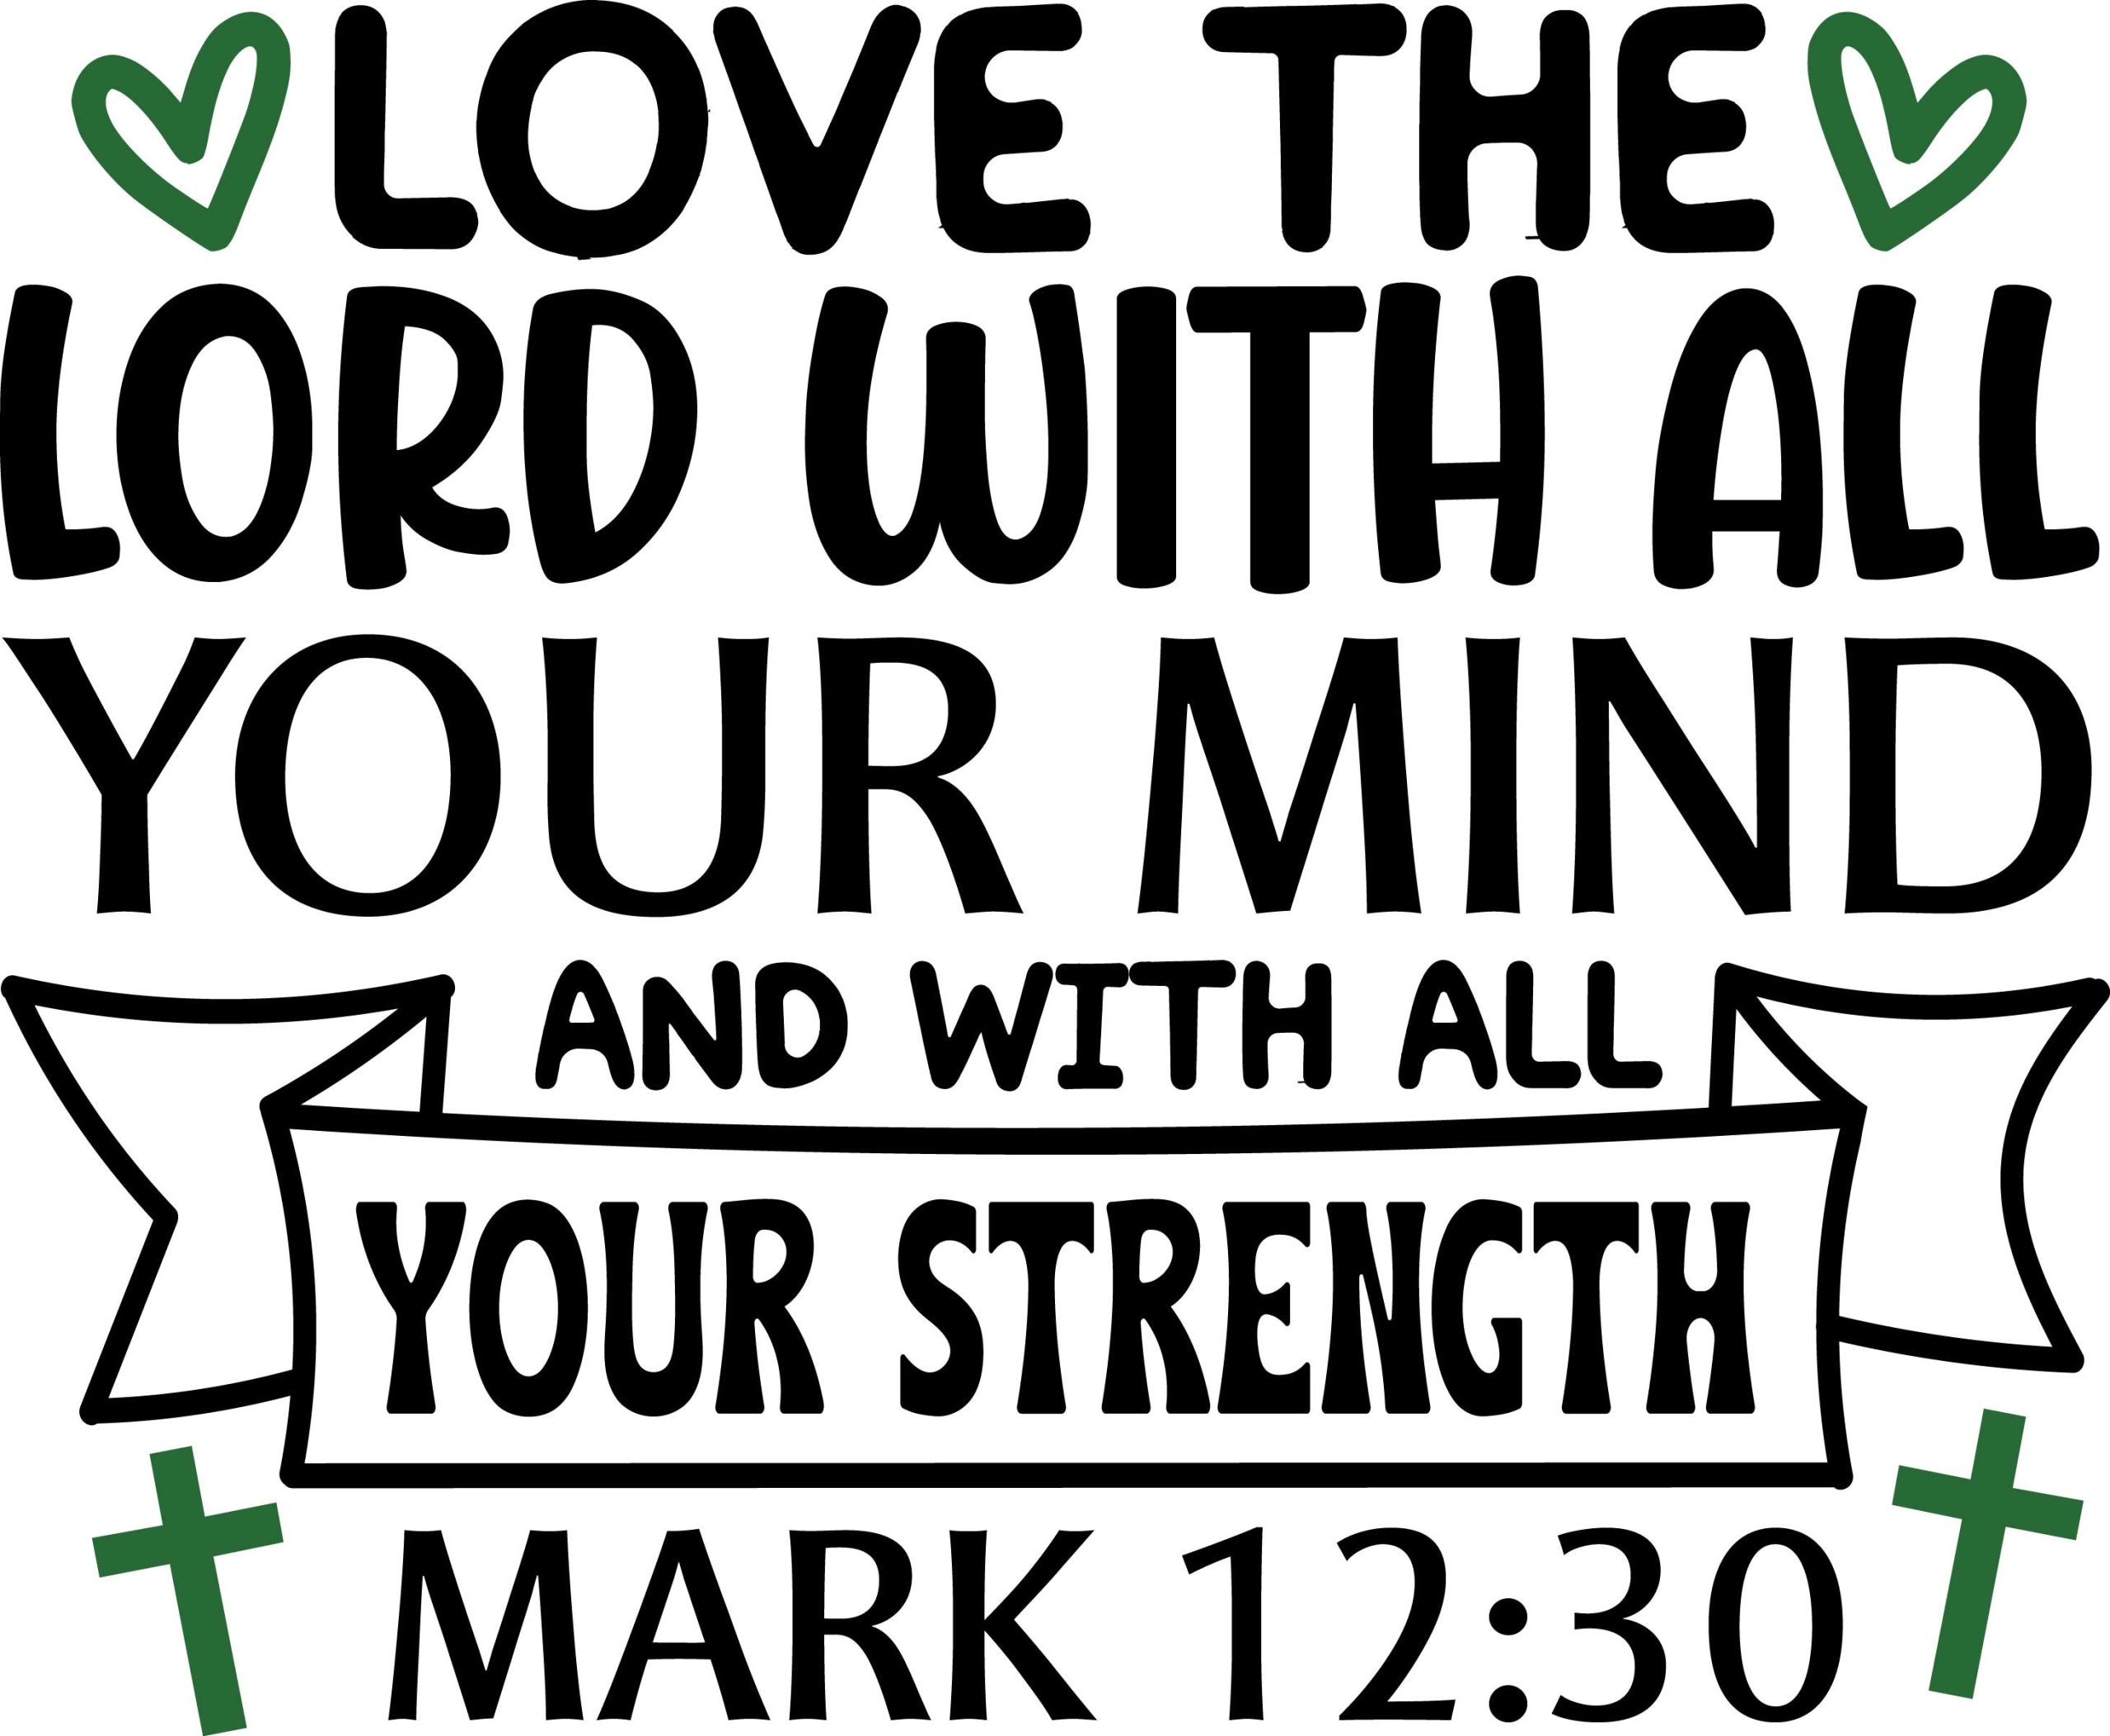 Love the lord with all your mind and with all your strength mark 12:30, bible verses, scripture verses, svg files, passages, sayings, cricut designs, silhouette, embroidery, bundle, free cut files, design space, vector